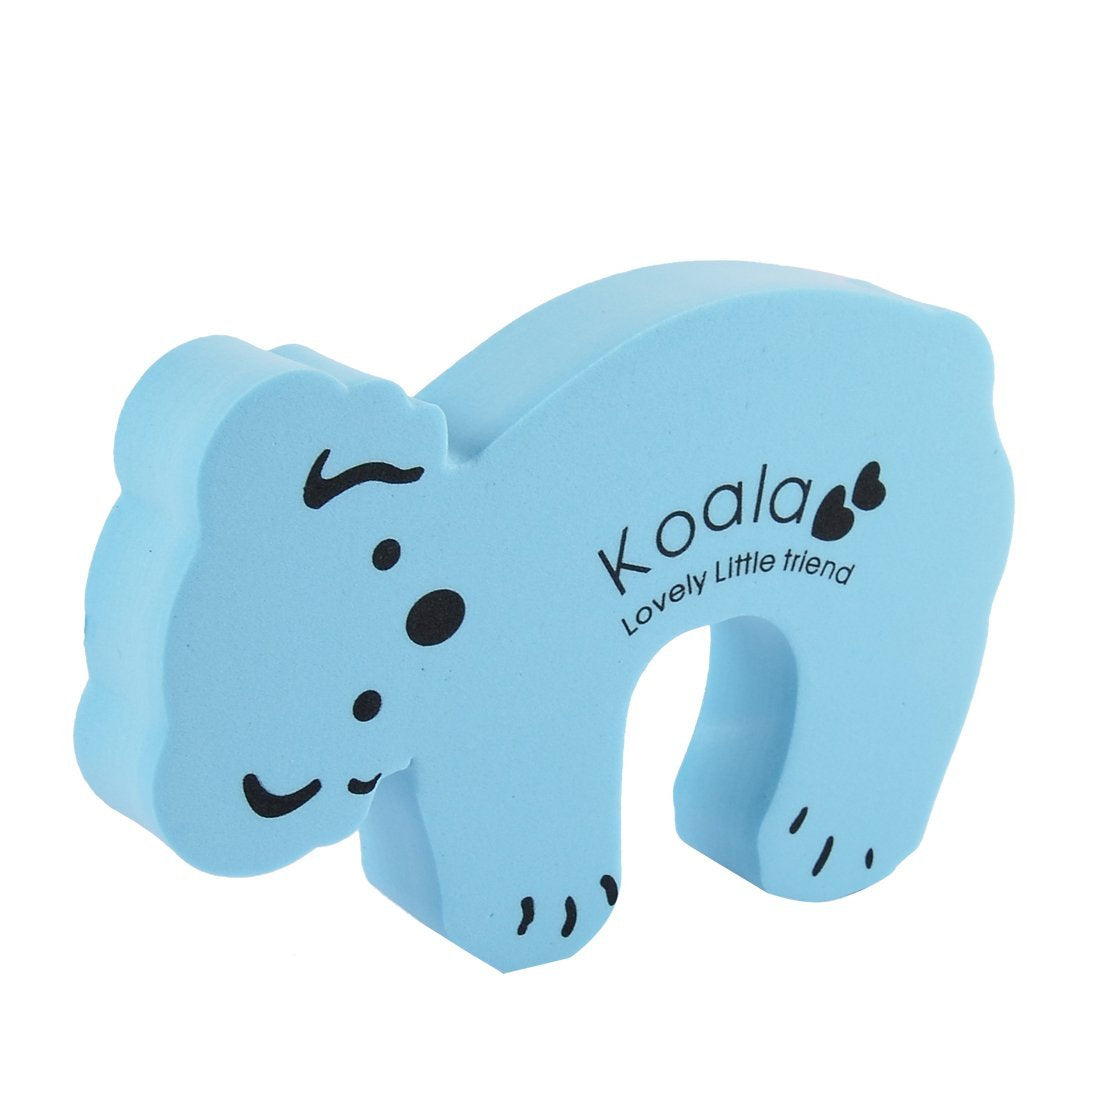 Animal Shape Door Stopper Lock Safety Guard, Kids Safety and Protection Finger Pich Door Guard, Baby Safety Cute Animal Security Door Stopper (2pc Set)